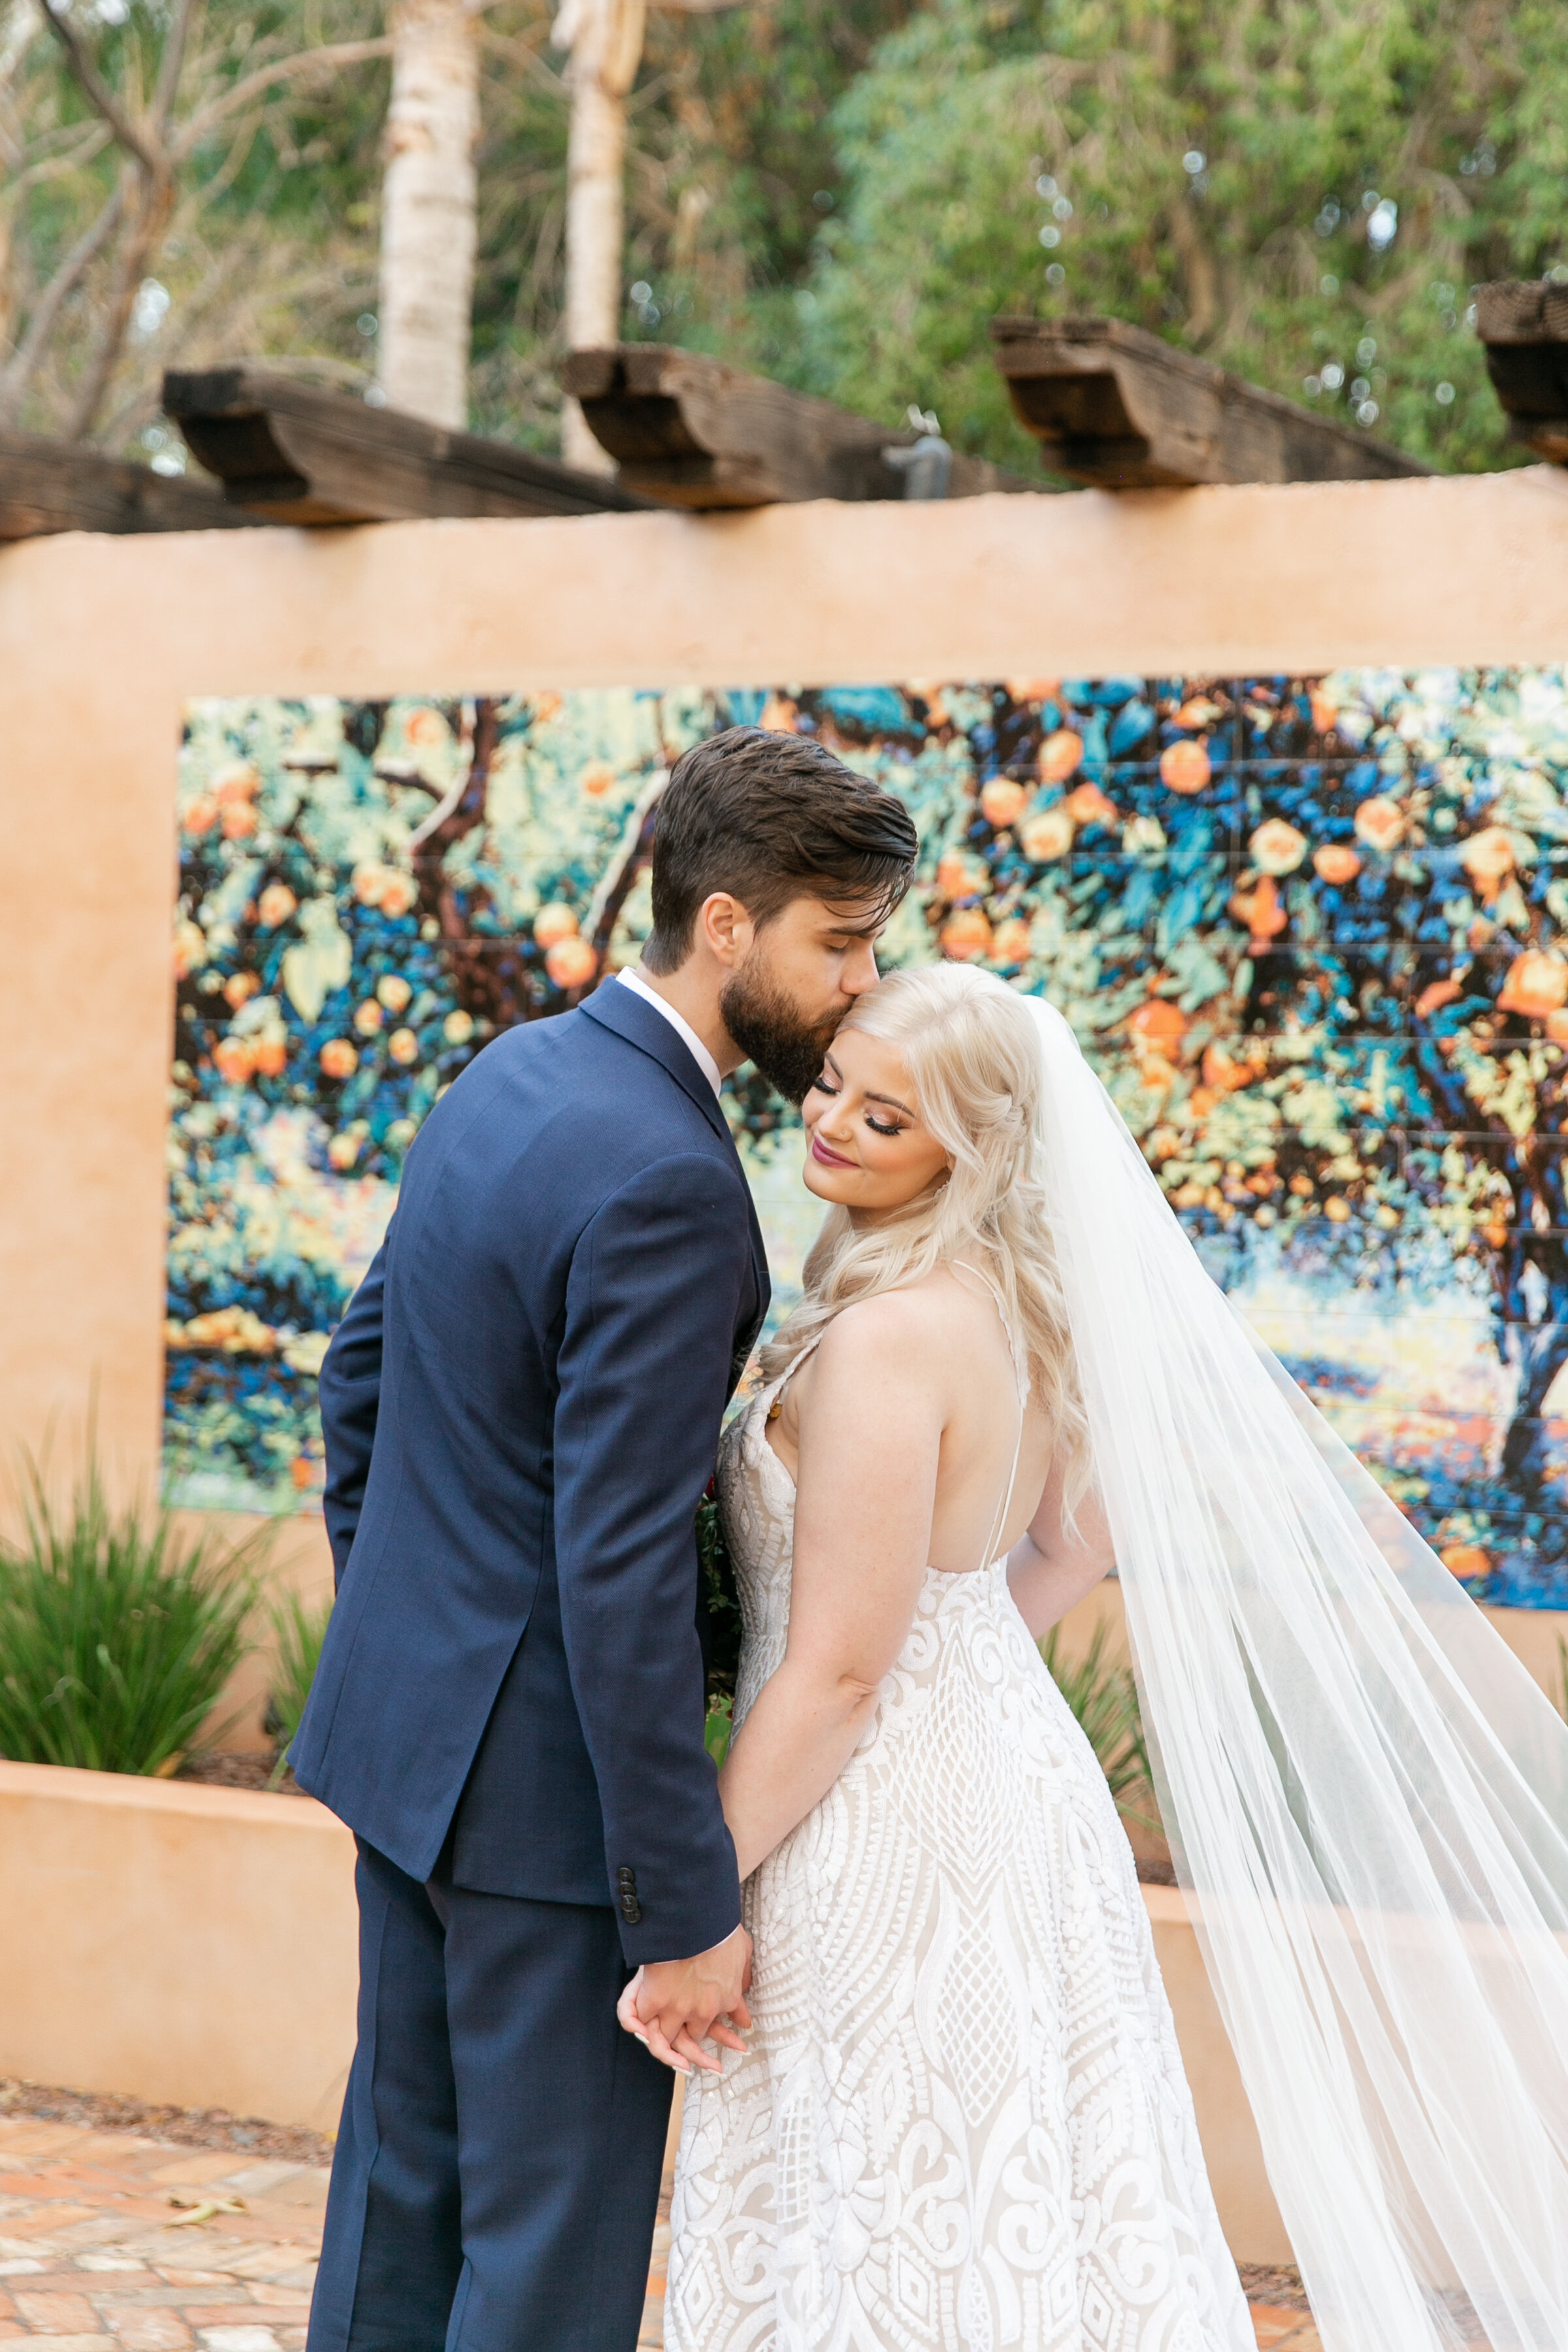 Karlie Colleen Photography - The Royal Palms Wedding - Some Like It Classic - Alex & Sam-527